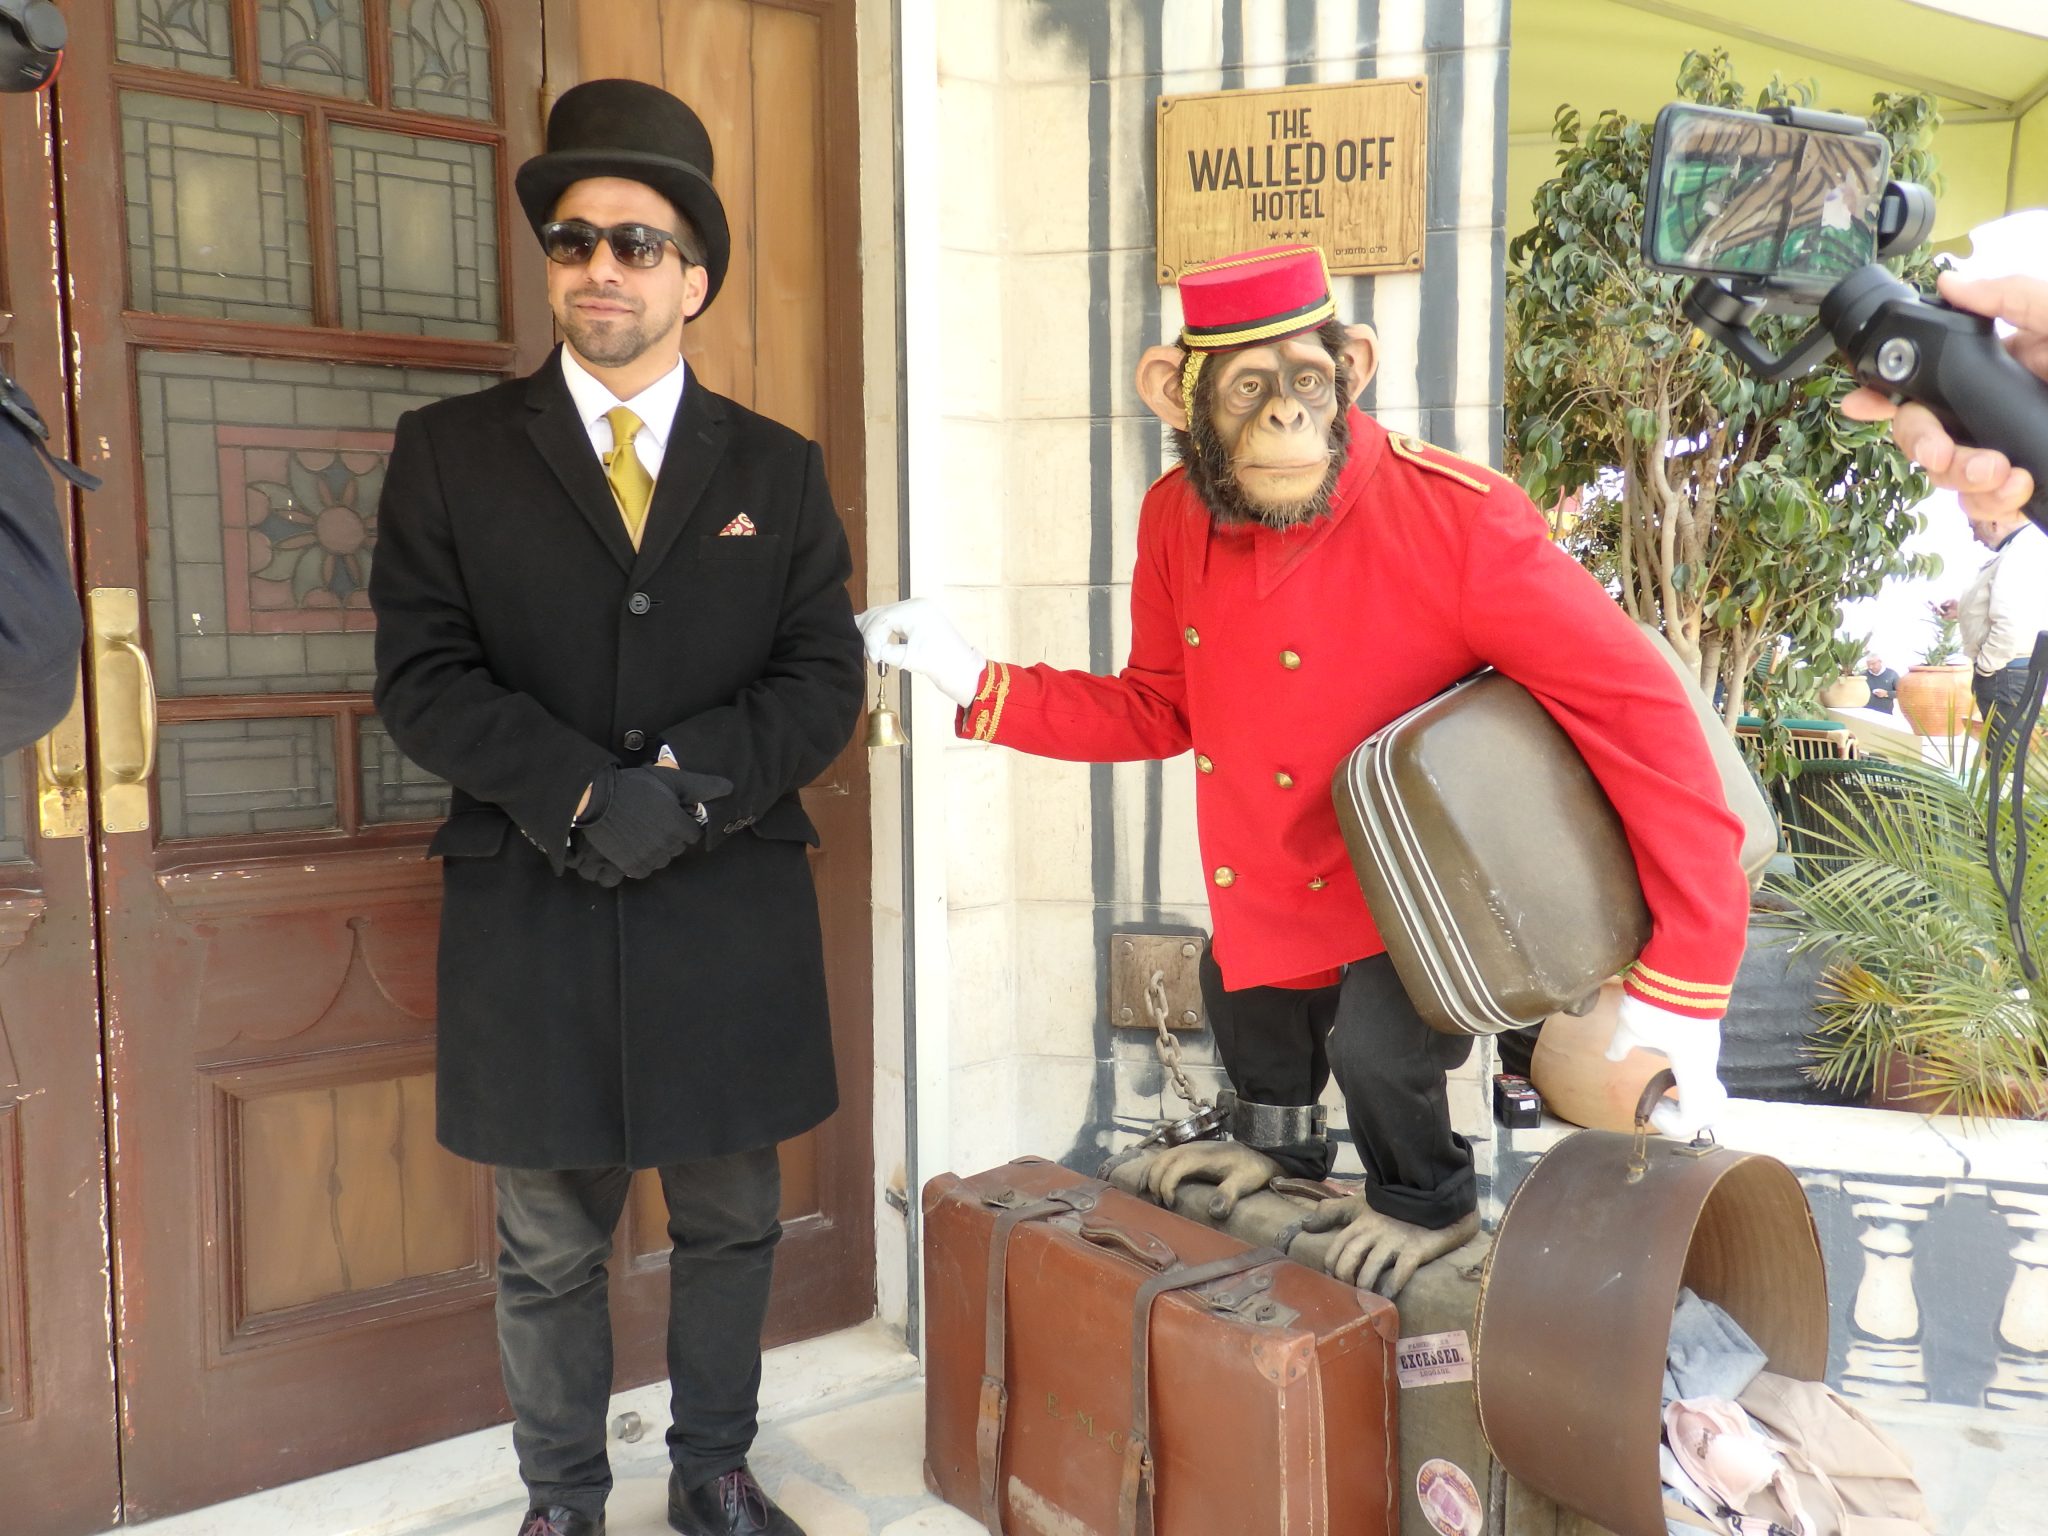 At the entrance to the Walled Off Hotel, the doorman and the "bellboy." Visiting Bethlehem